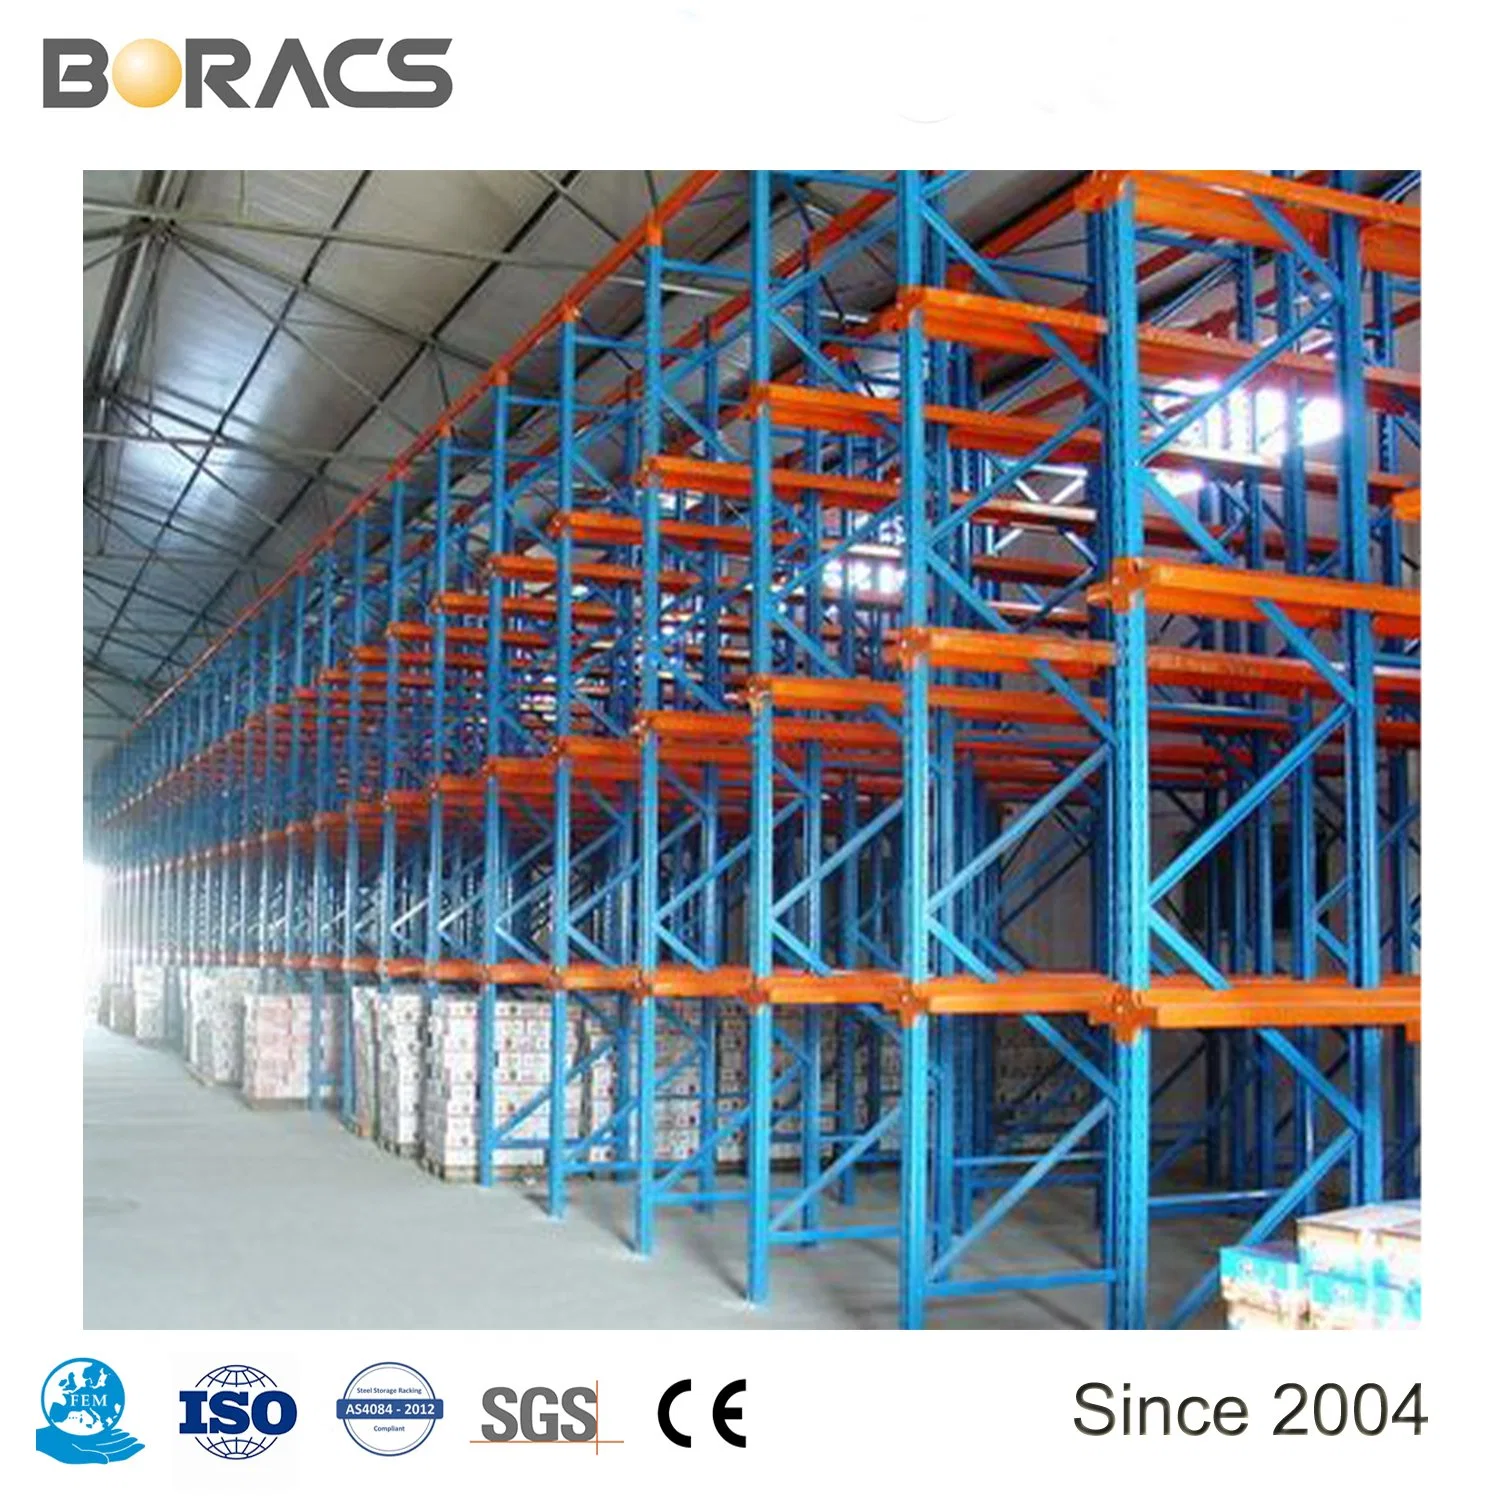 Heavy Duty Adjustable Most Professional China Drive in Rack System for Warehouse Storage Rack